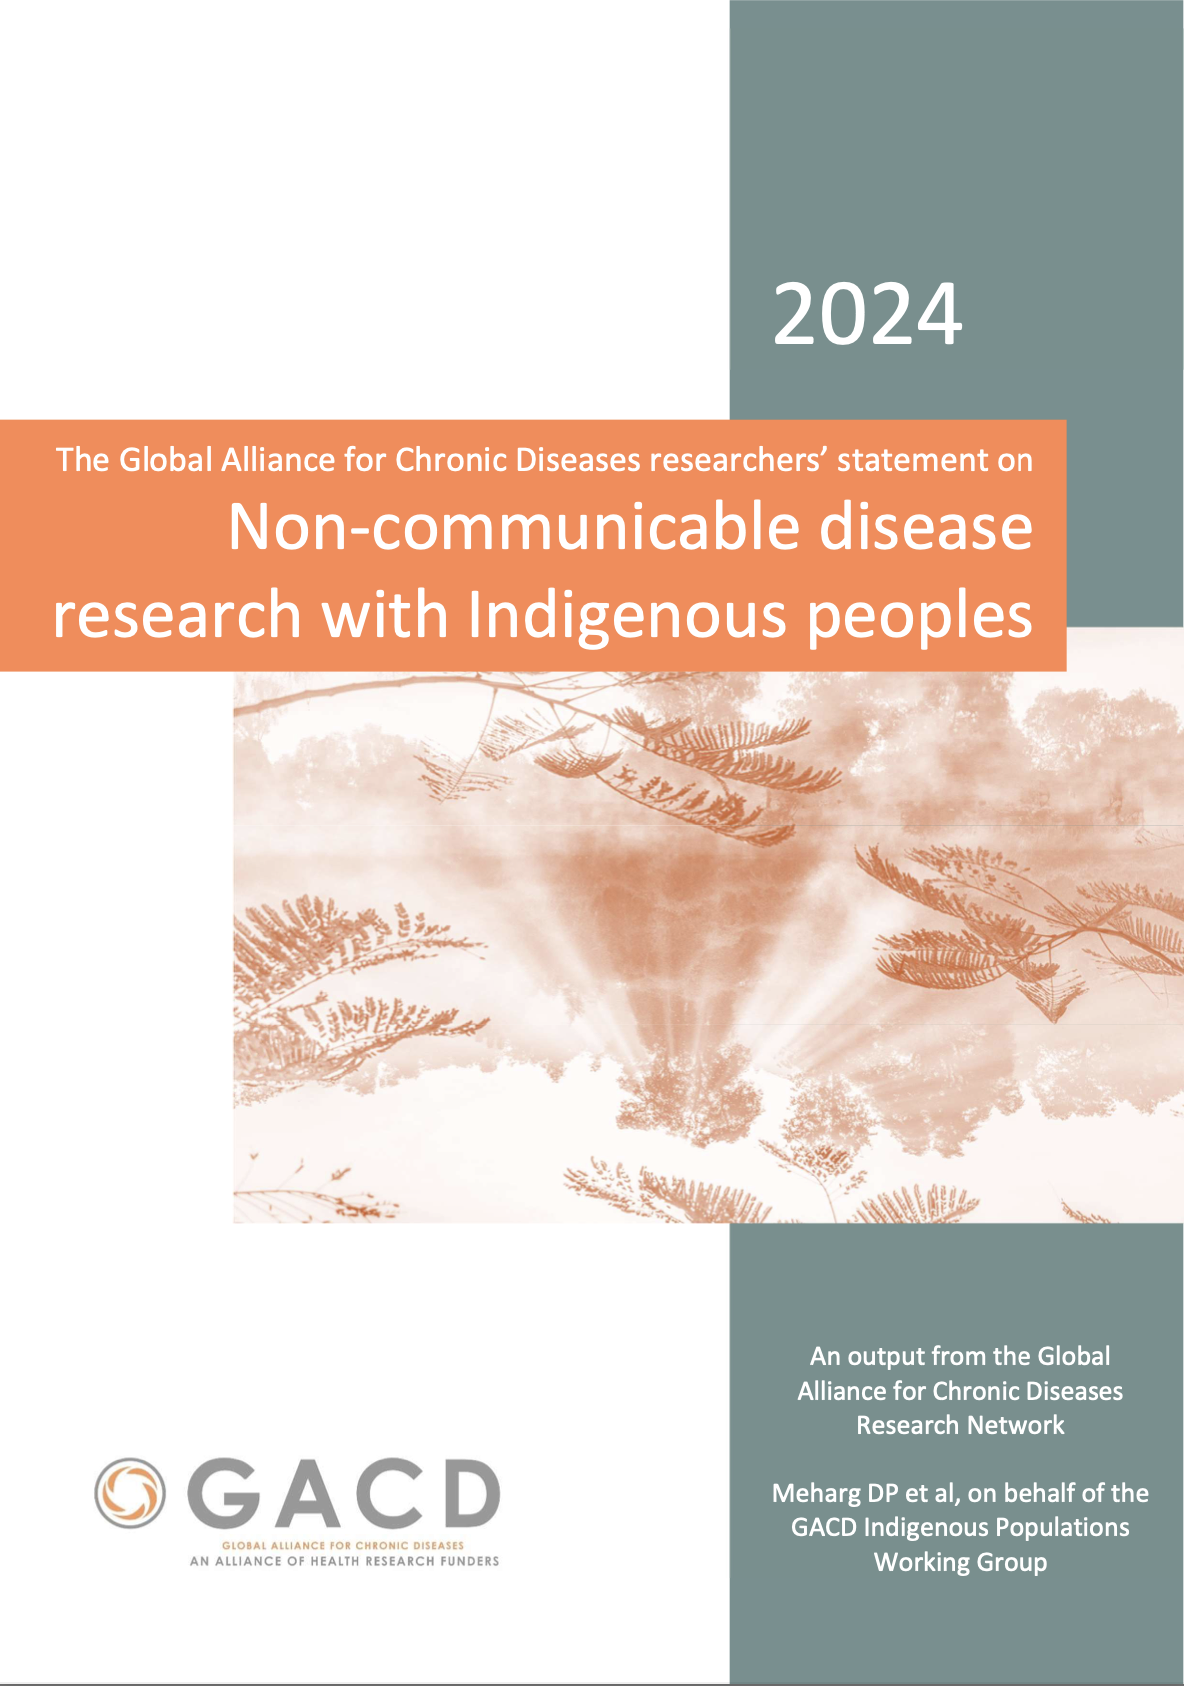  The Global Alliance for Chronic Diseases researchers’  statement on non-communicable disease research with  Indigenous peoples